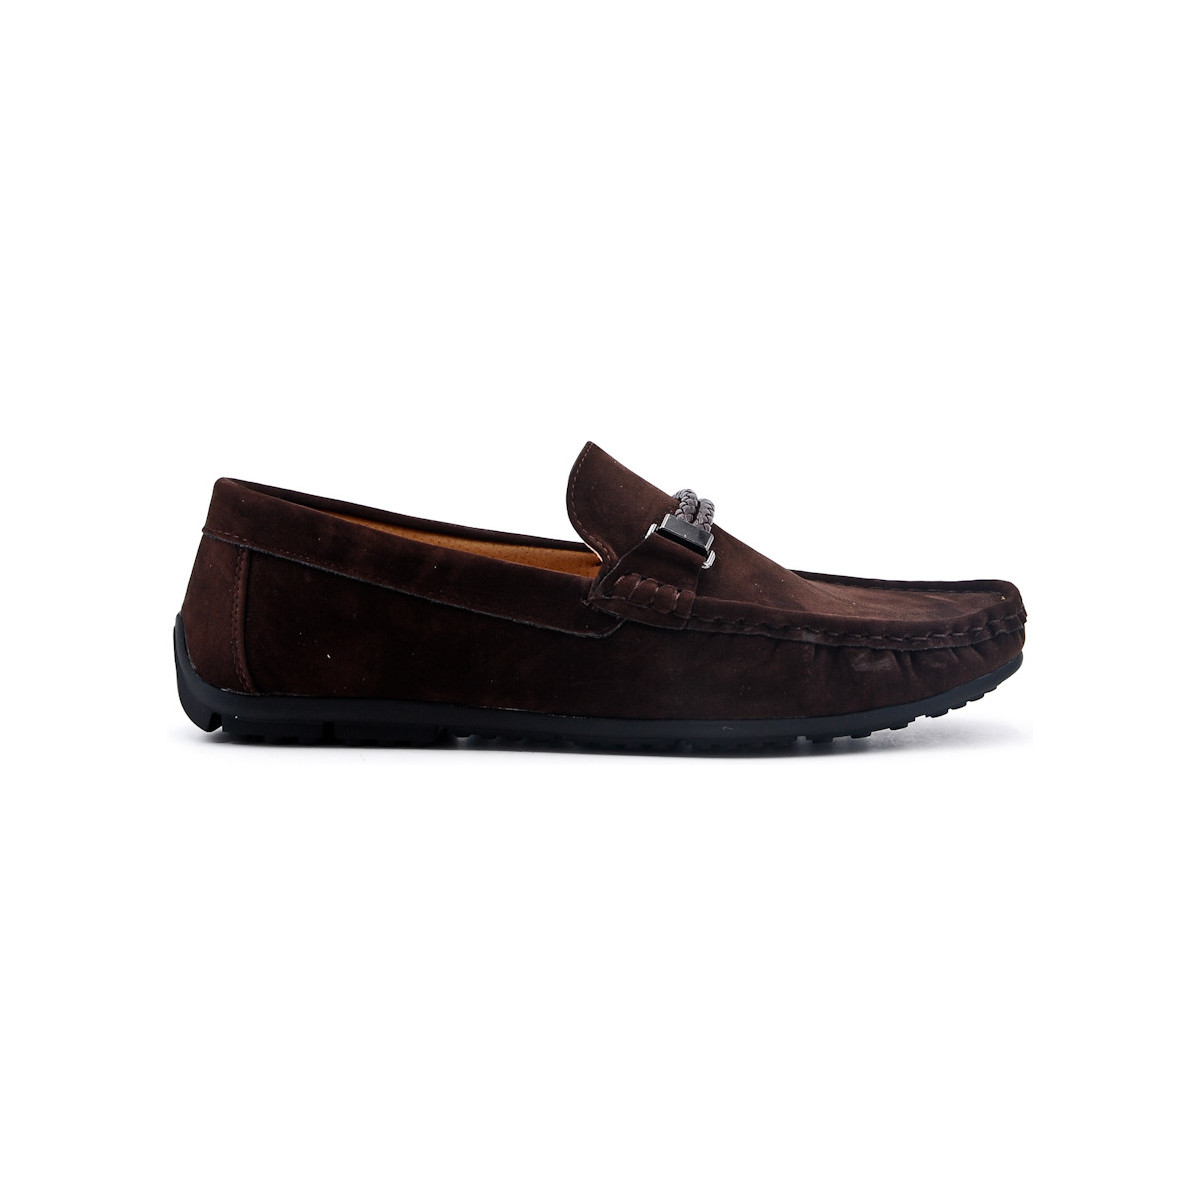 Chaussures Mocassins Uomo Design Mocassin Homme Maddox cafe